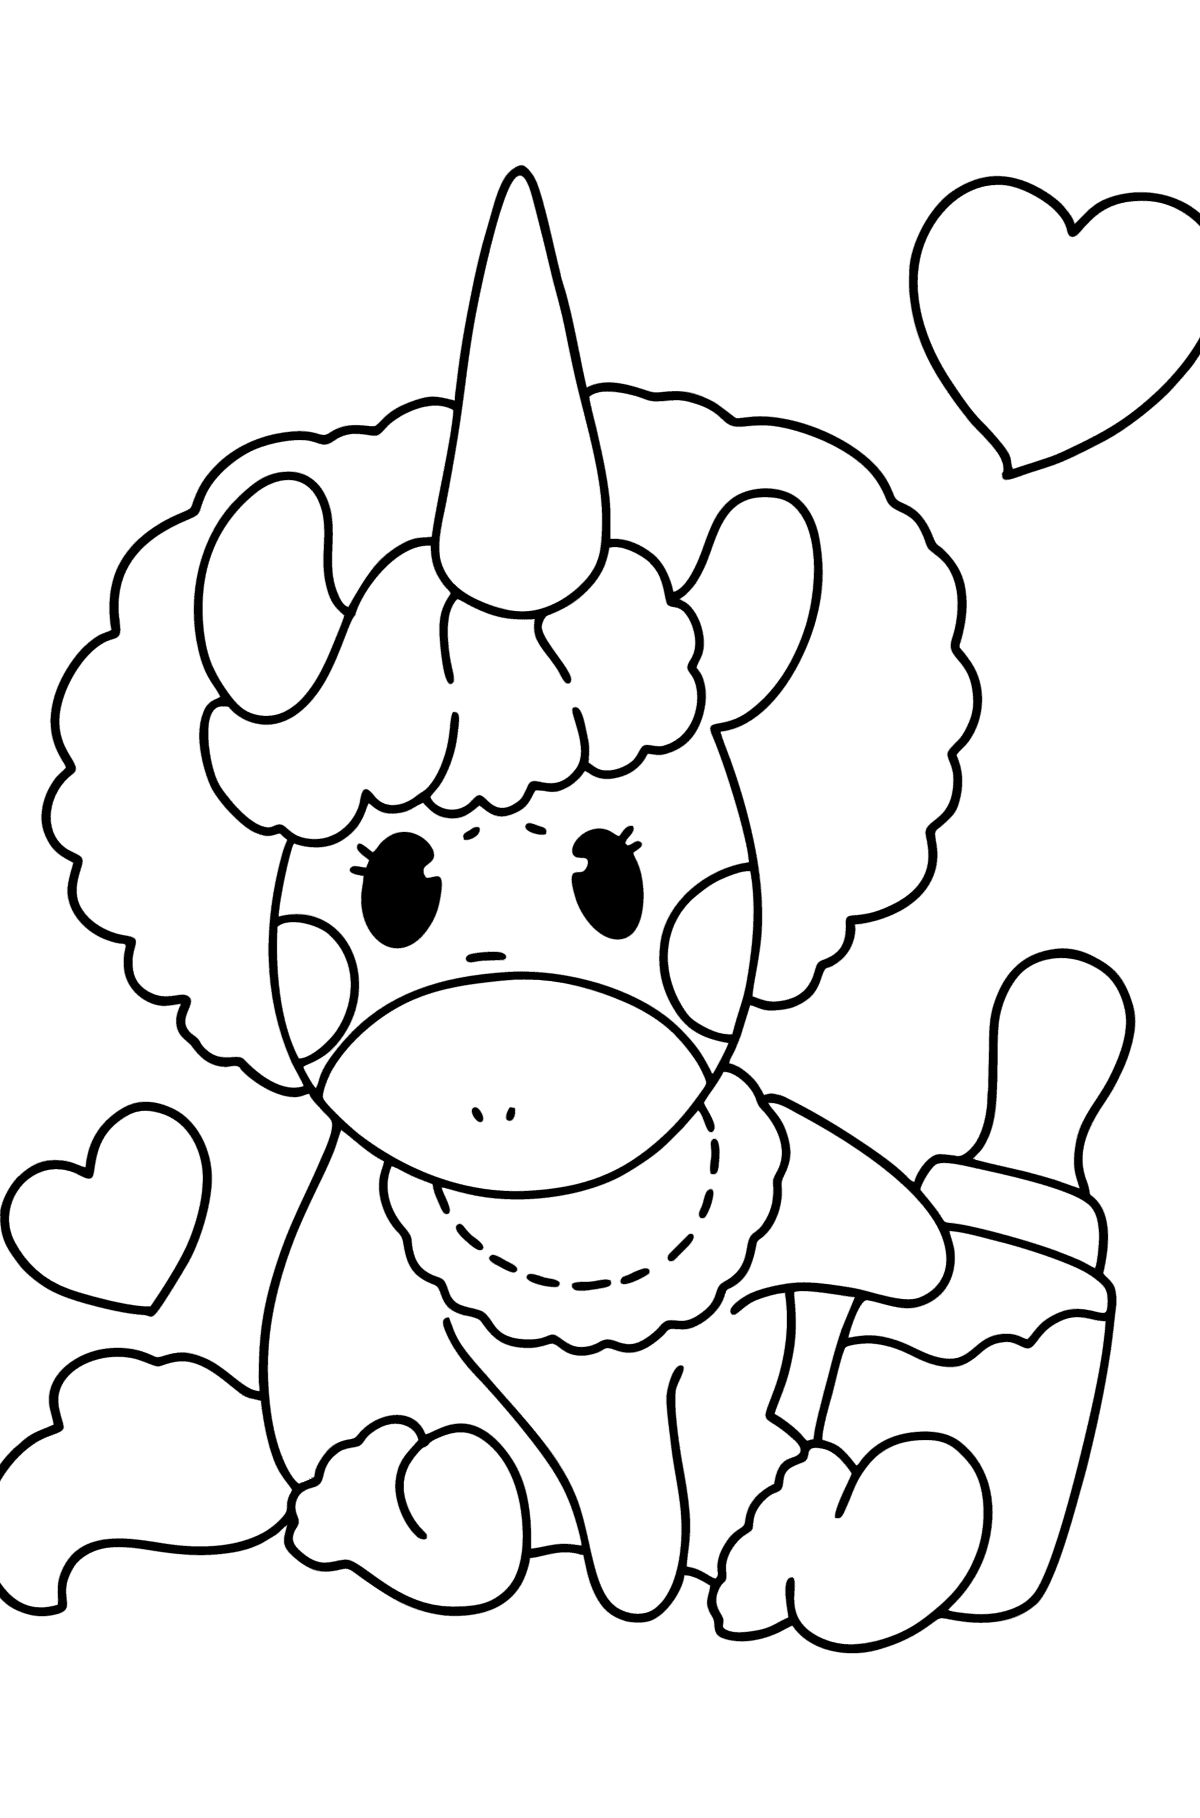 Unicorn kid coloring page - Coloring Pages for Kids